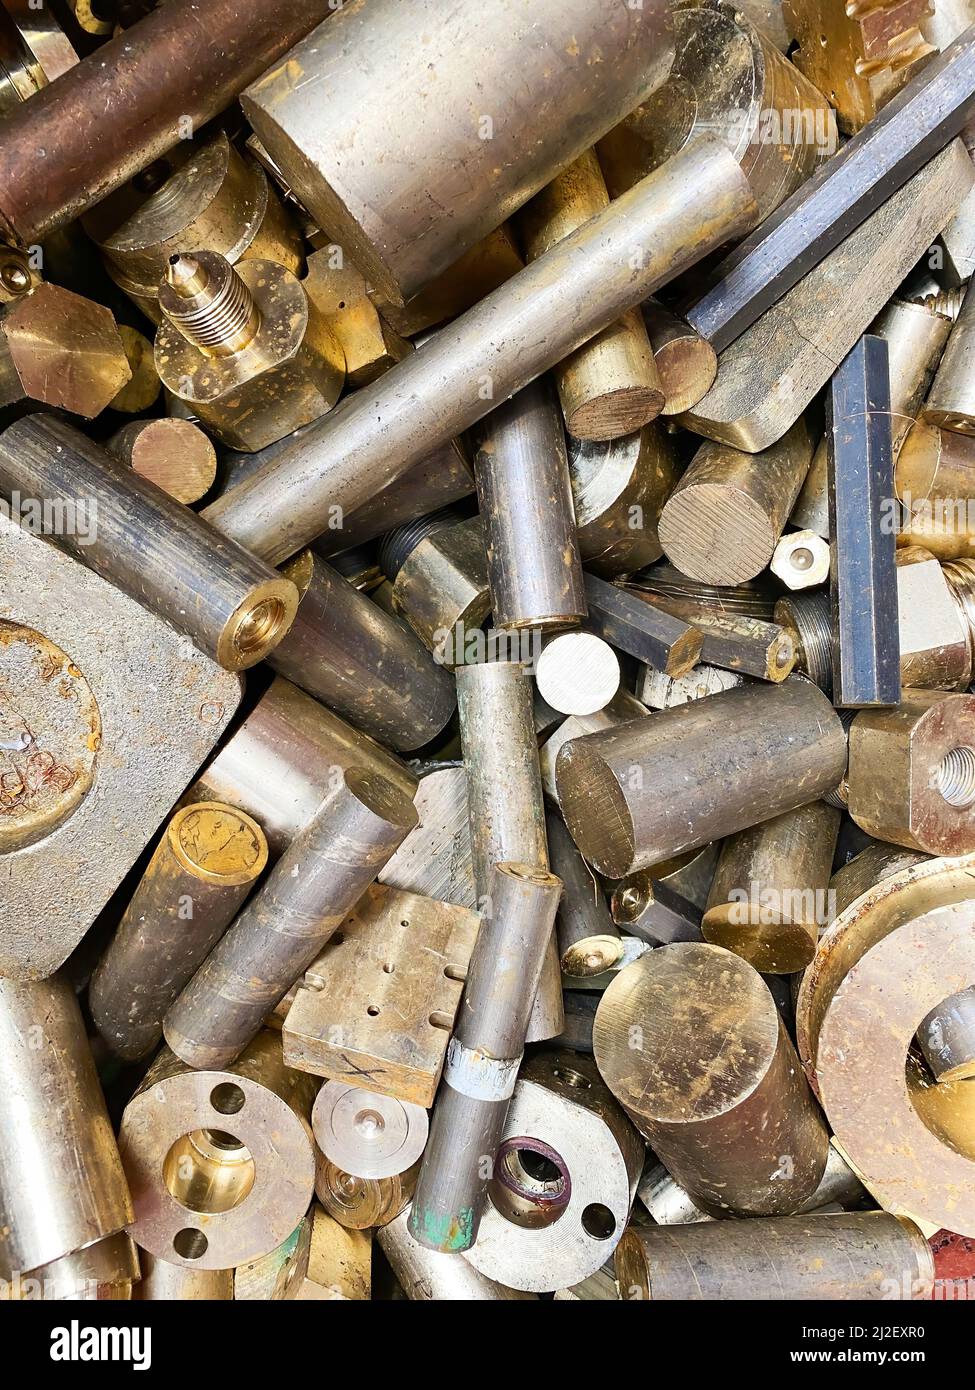 Scrap Brass Nuts and Fittings Ready To Be Recycled Stock Photo